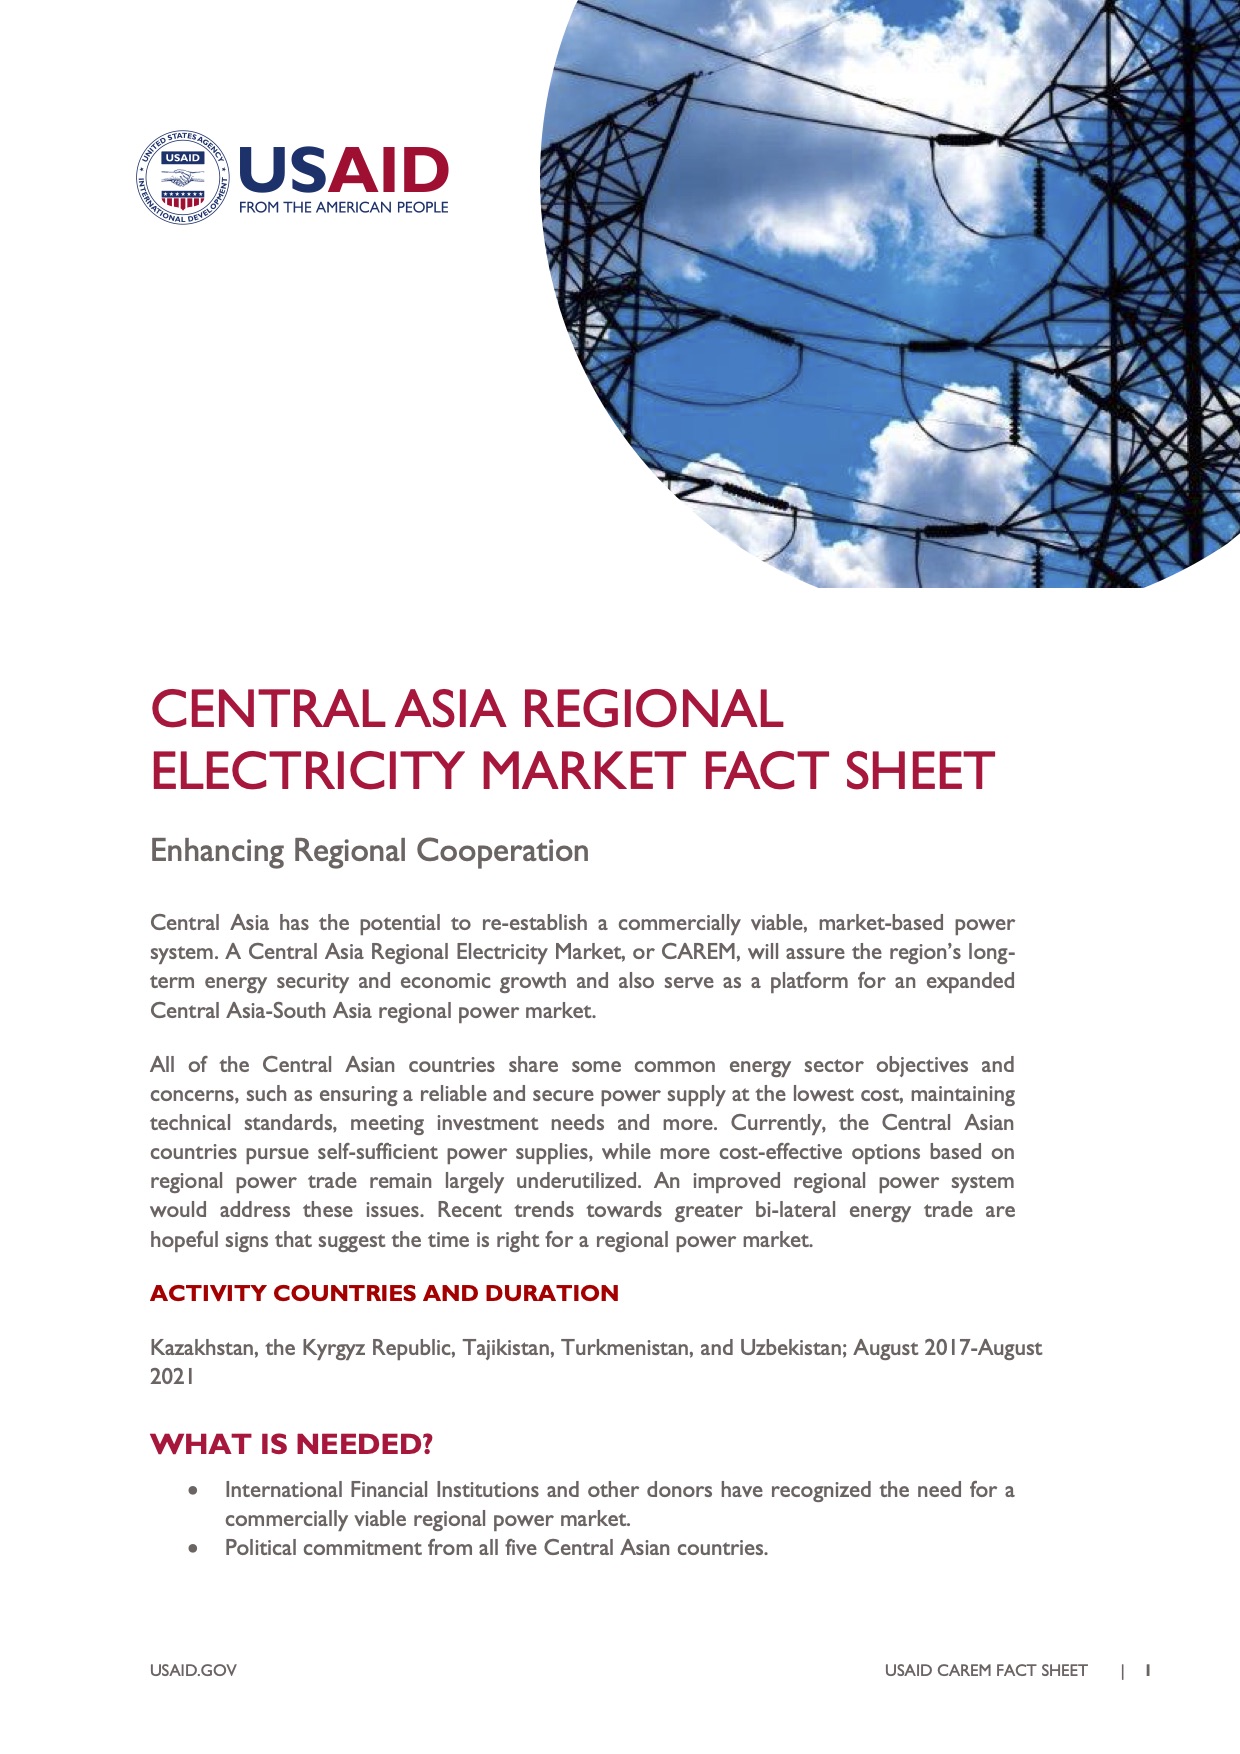 Central Asia Regional Electricity Market Fact Sheet